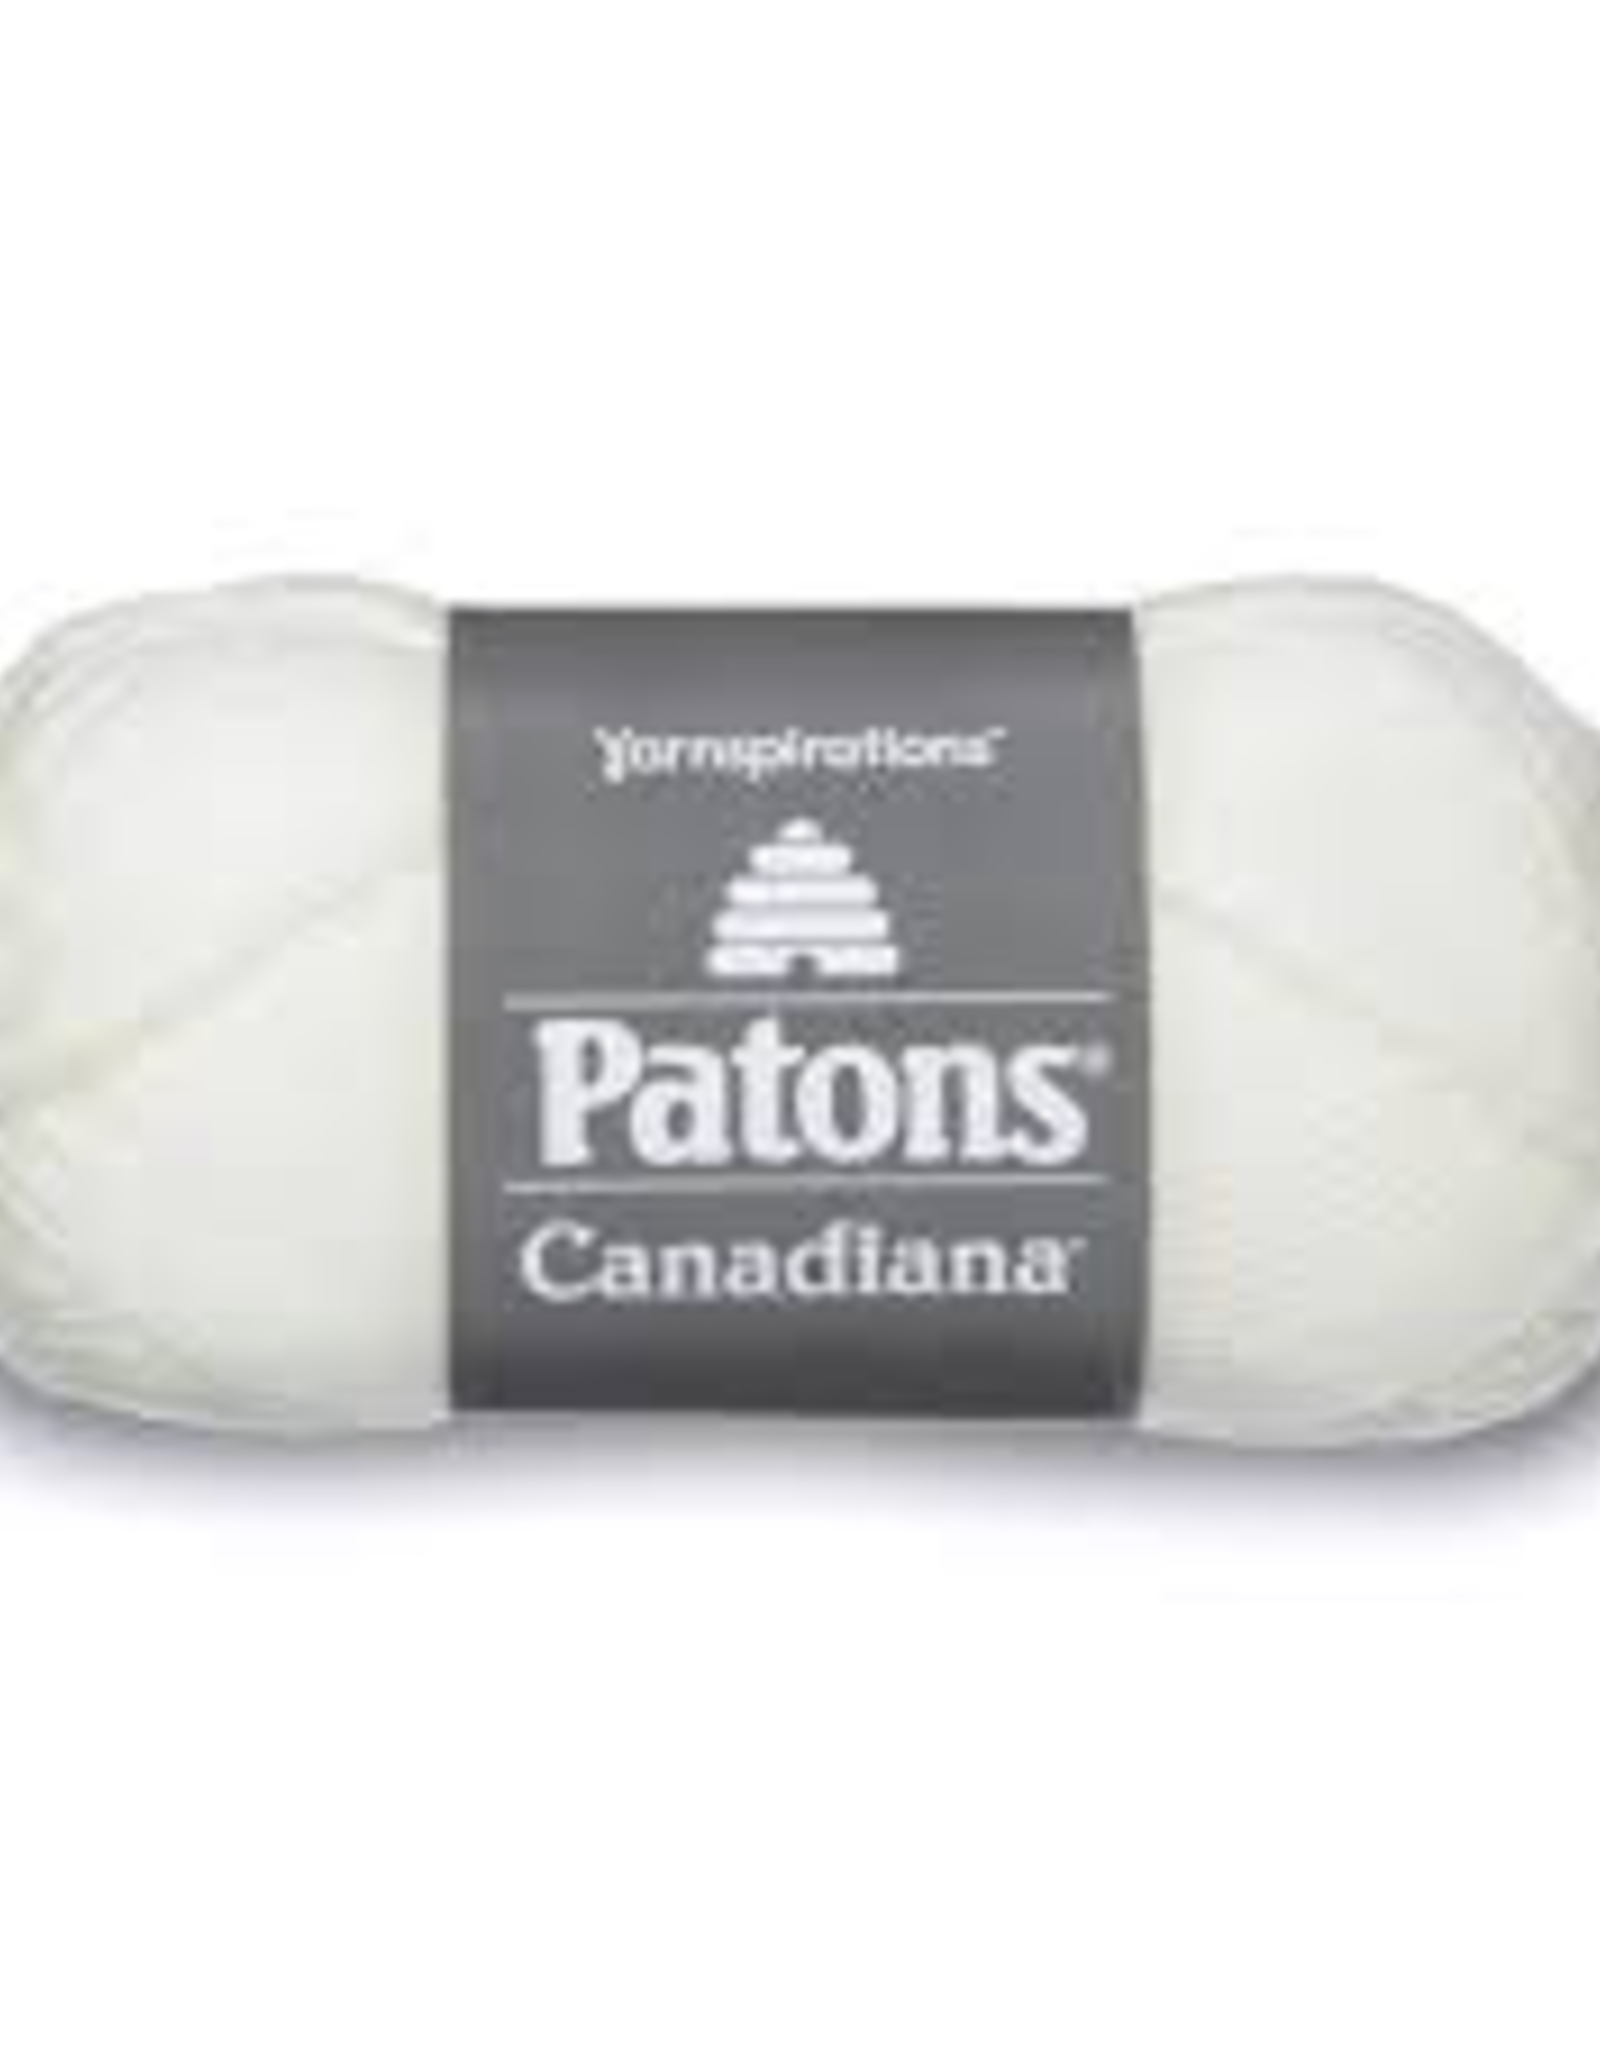 Patons Patons Canadiana - Winter White